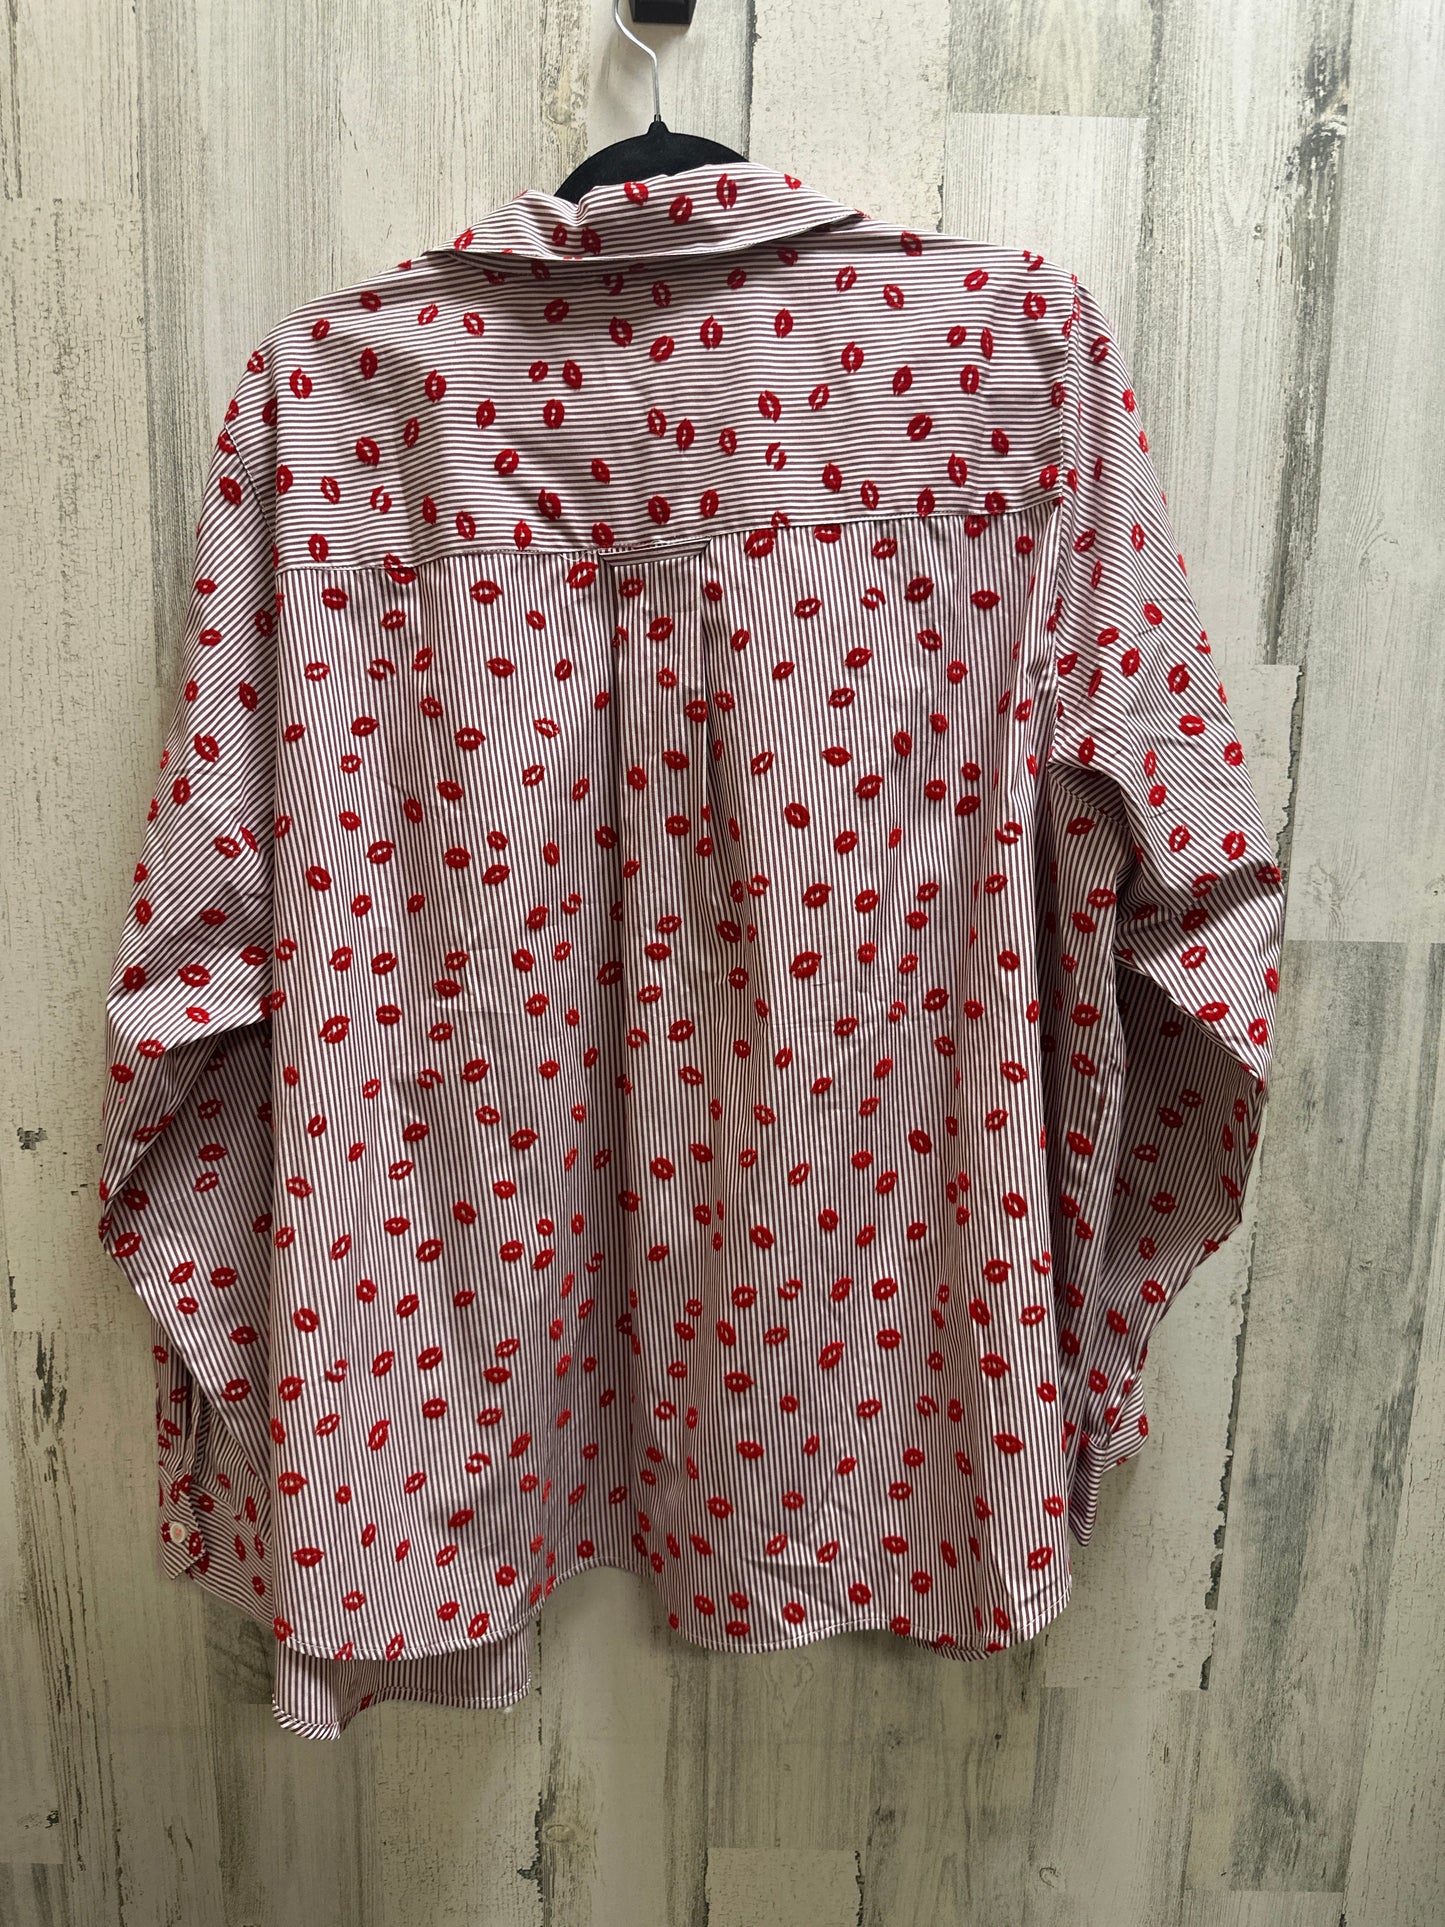 Red Top Long Sleeve Maeve, Size 4x